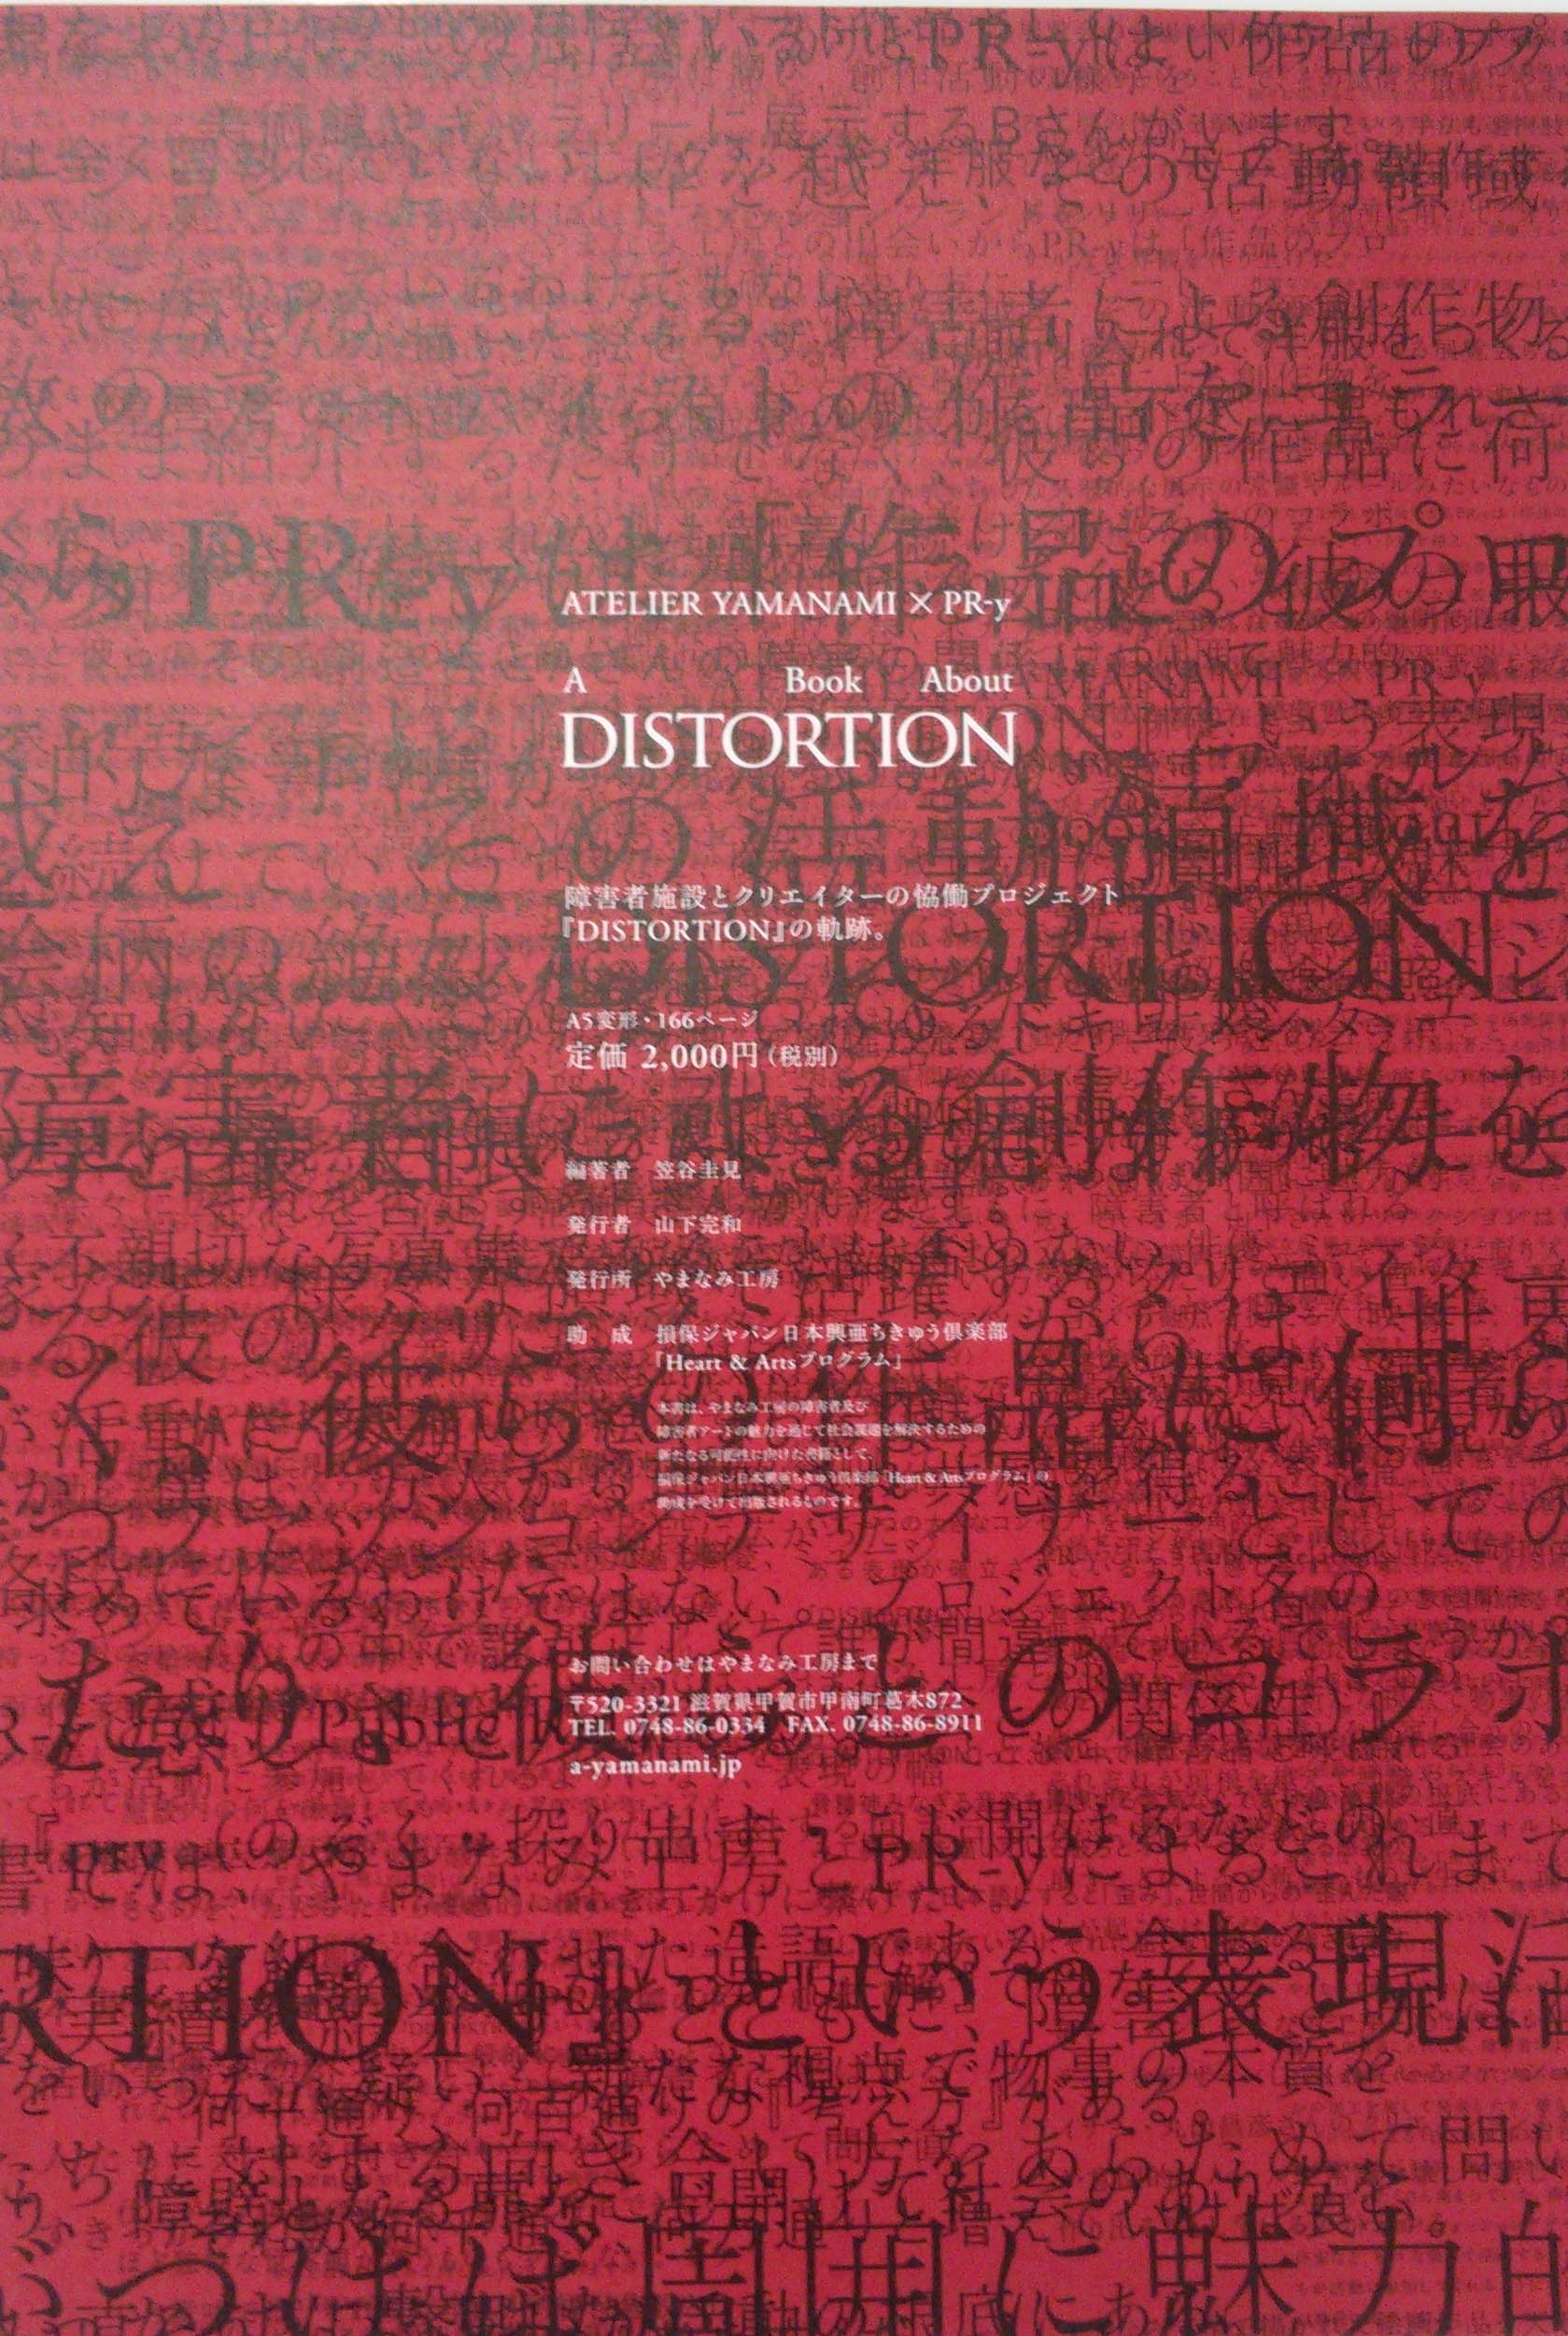 ATERIER YAMANAMI × PR-y 「A Book About DISTORTION」